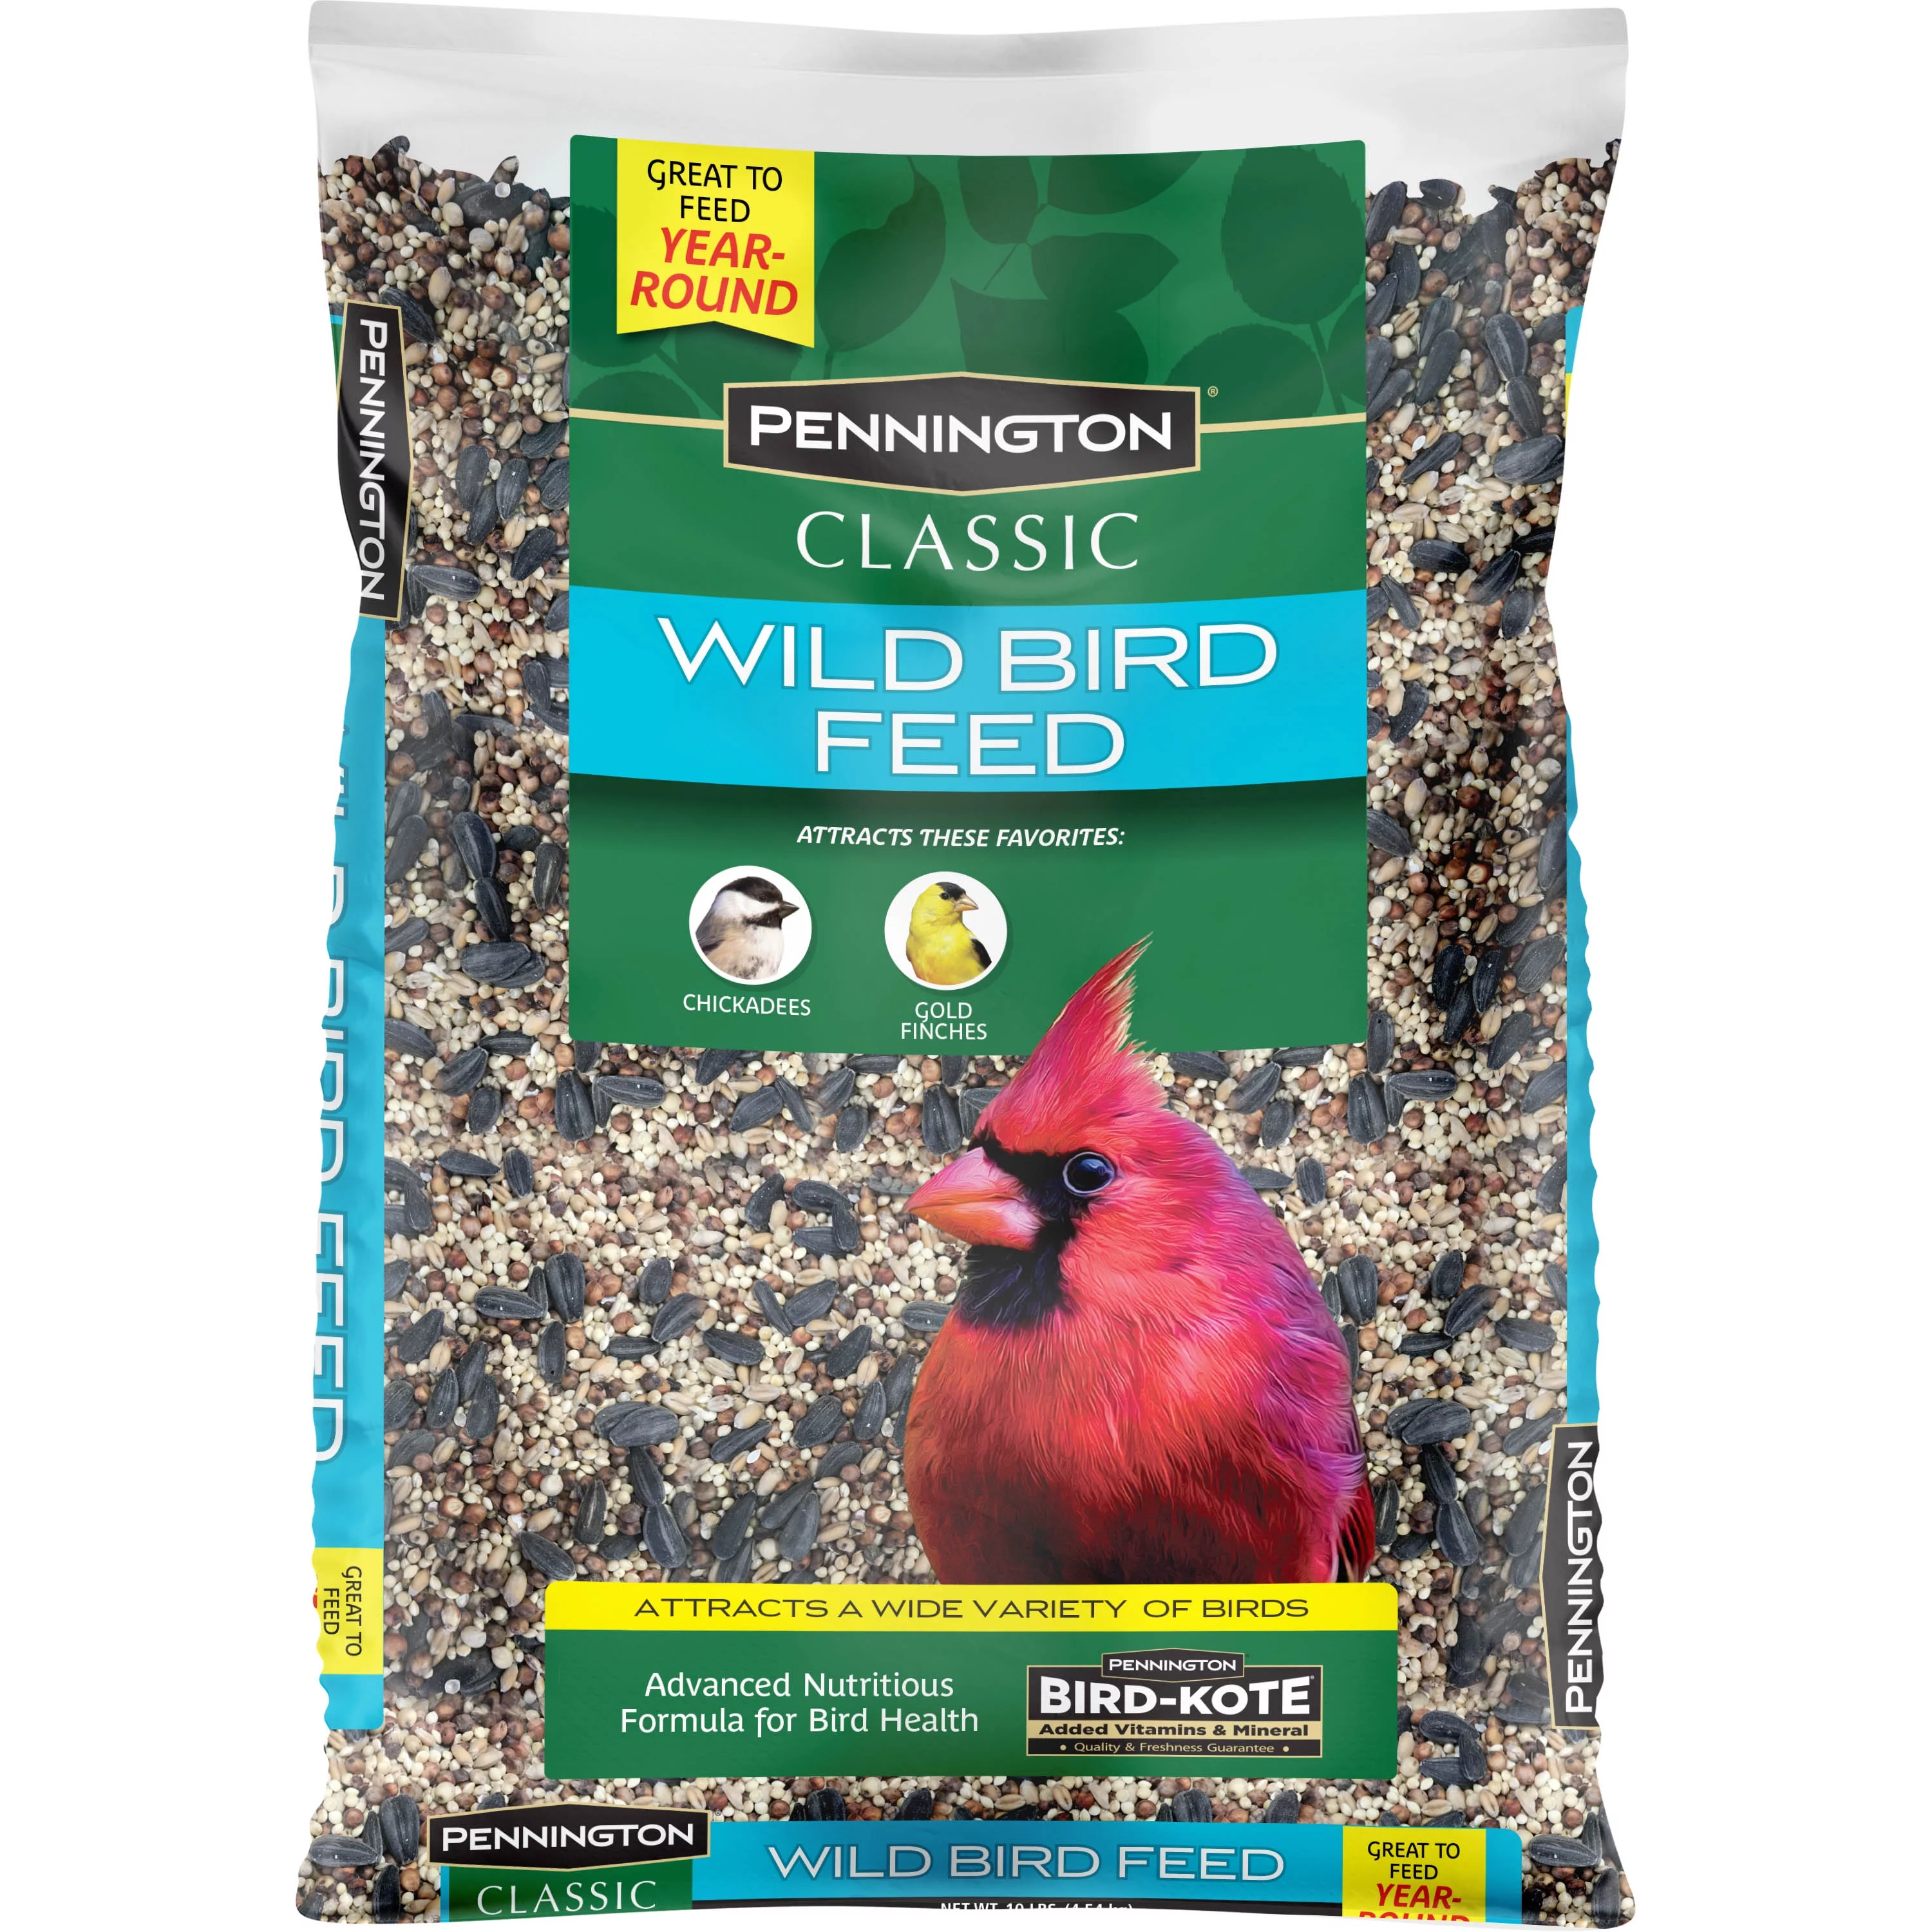 Pennington Classic Dry Wild Bird Feed and Seed, 10 lb. Bag, 1 Pack